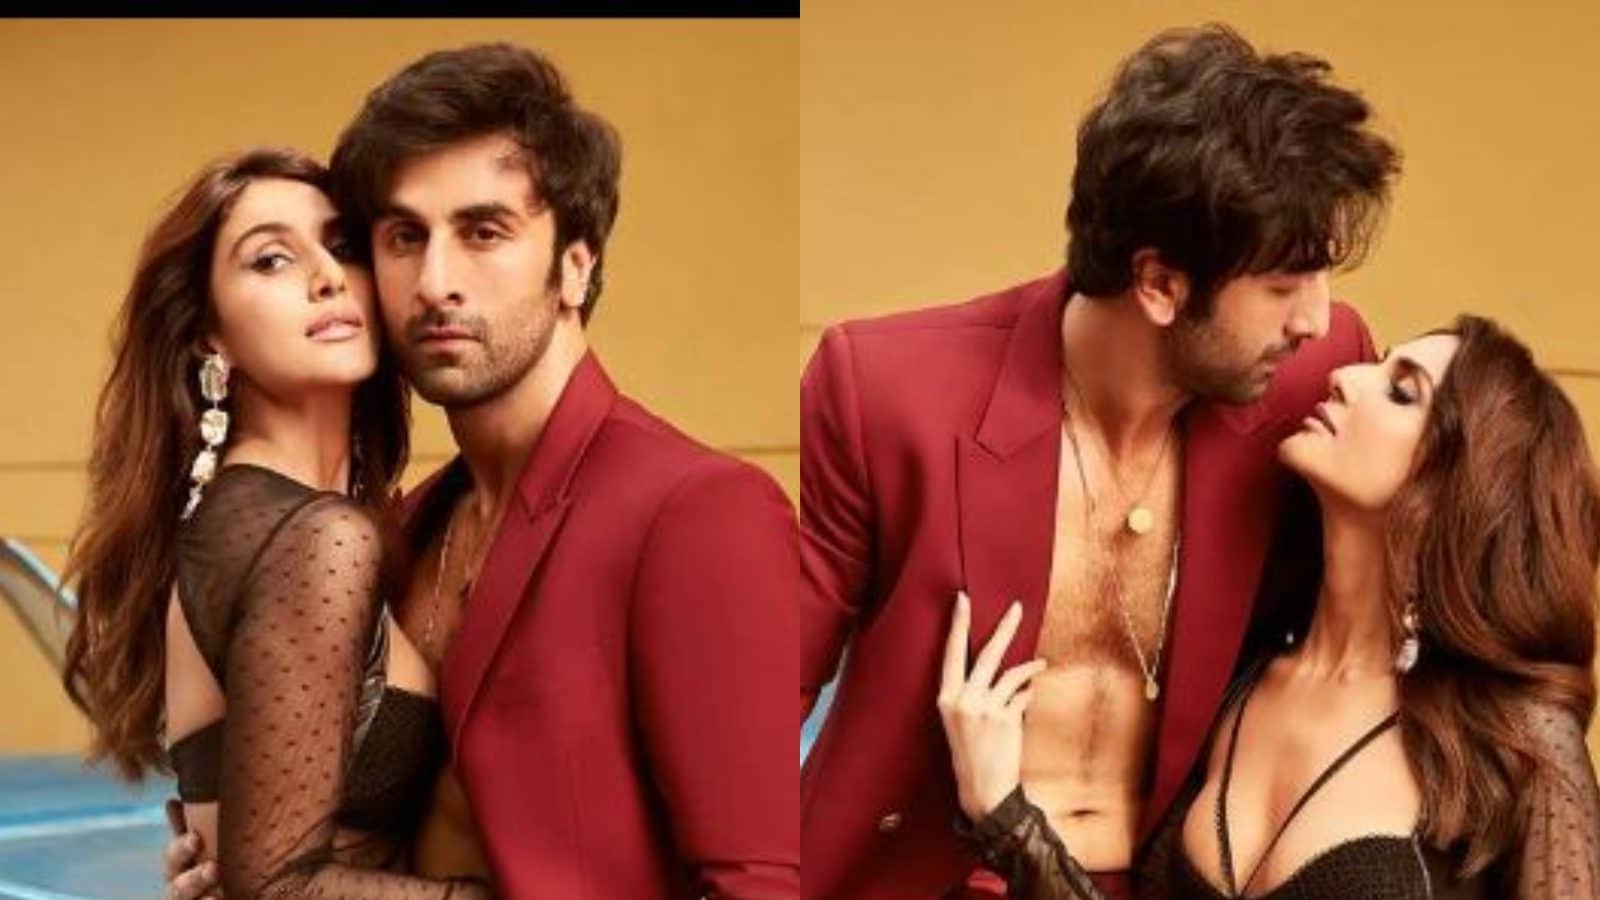 Ranbir Kapoor Goes Bare-Chested For Sizzling Photoshoot with Shamshera  Co-Star Vaani Kapoor, See Pics - News18